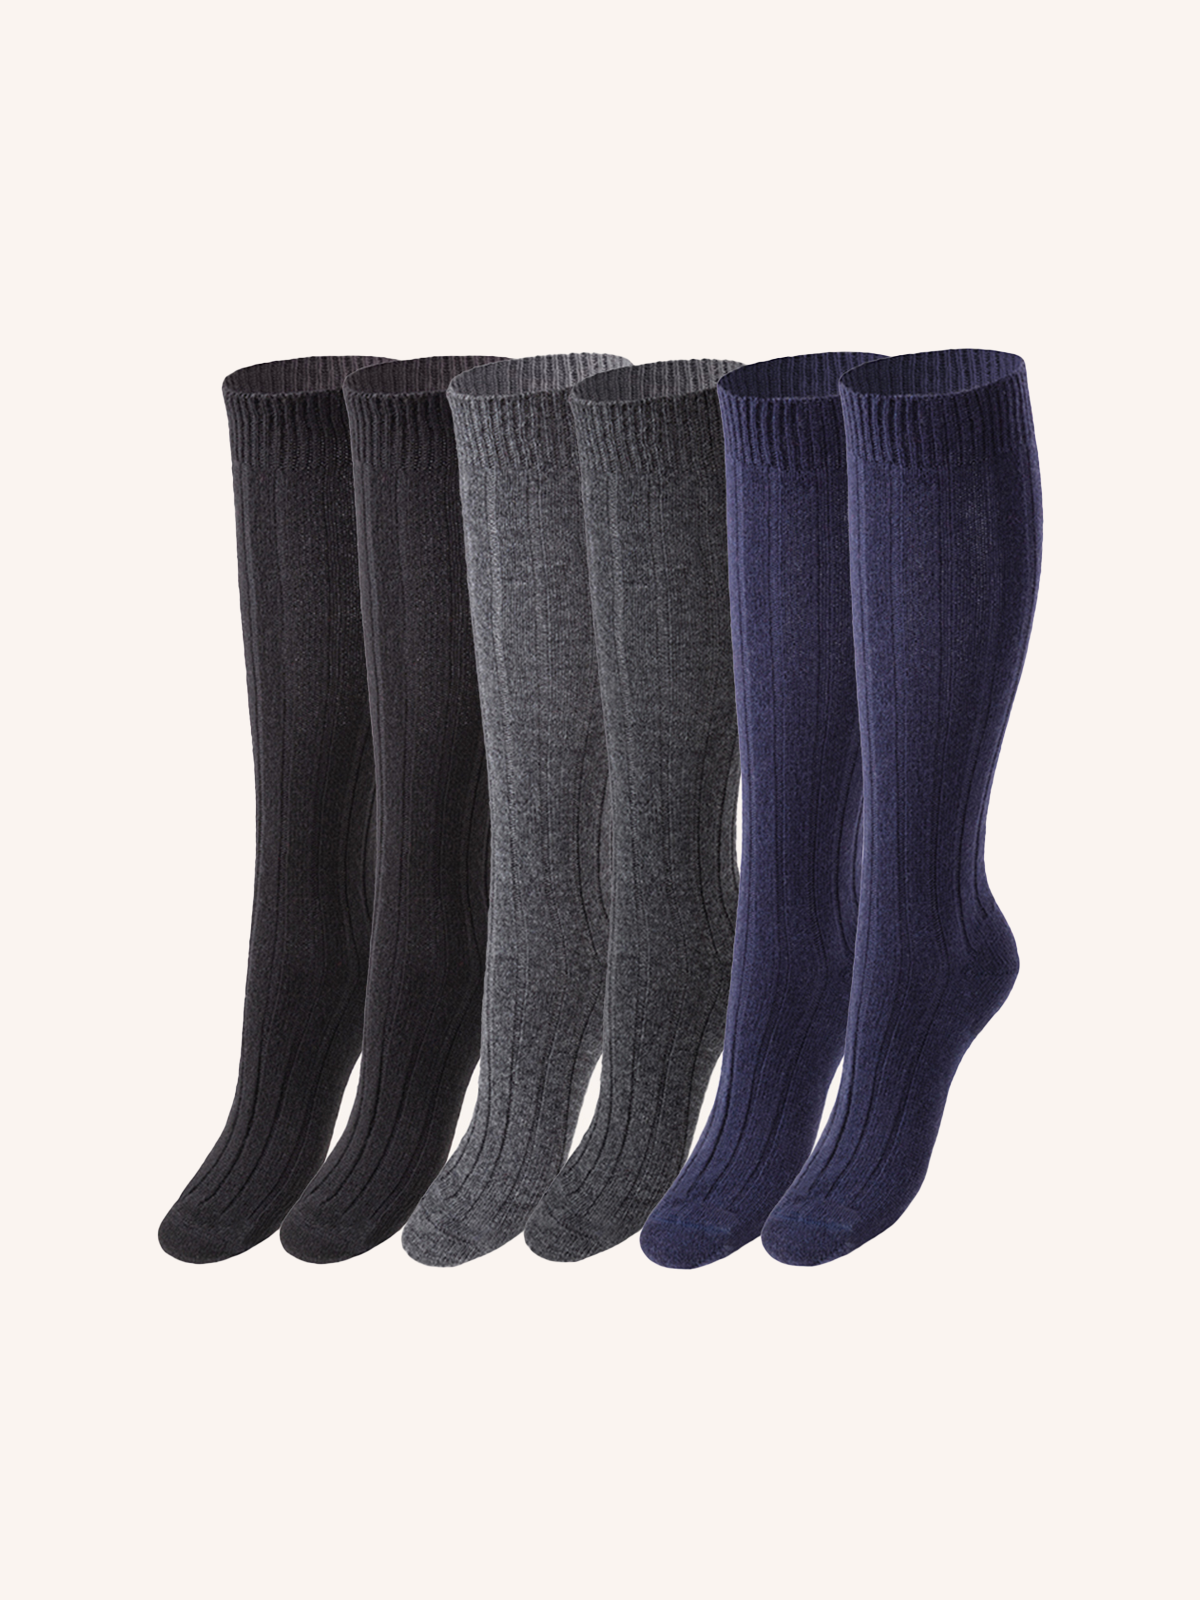 Long Wool Socks for Women | Plain Color | Pack of 6 pairs | Woolife DL